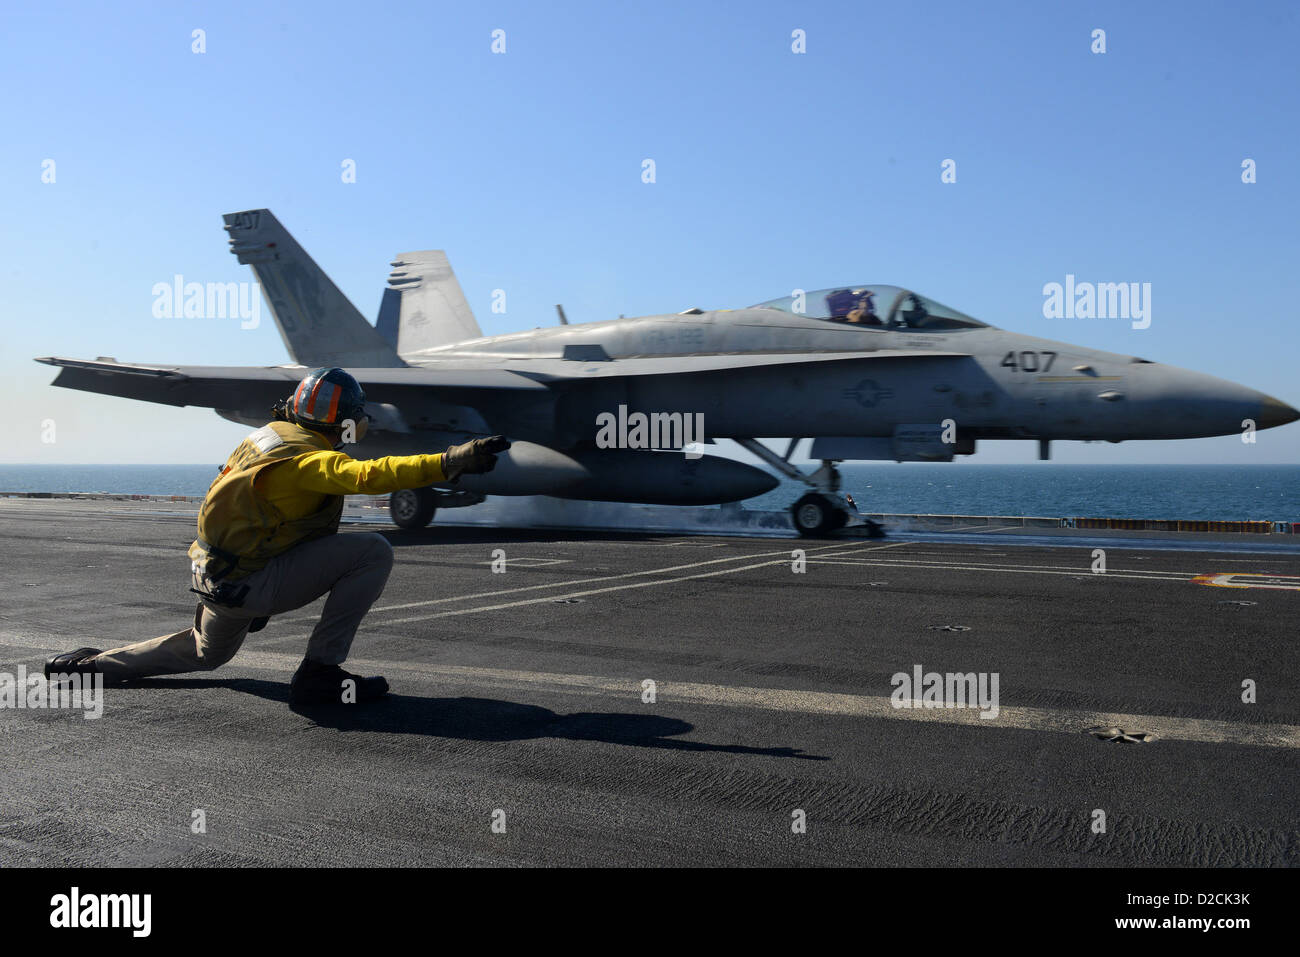 - A catapult and arresting gear officer signals for the launch of an F/A-18C Hornet from the Golden Dragons of Strike Fighter Squadron (VFA) 192 from the flight deck of aircraft carrier USS John C. Stennis (CVN 74). John C. Stennis is deployed to the U.S. Stock Photo